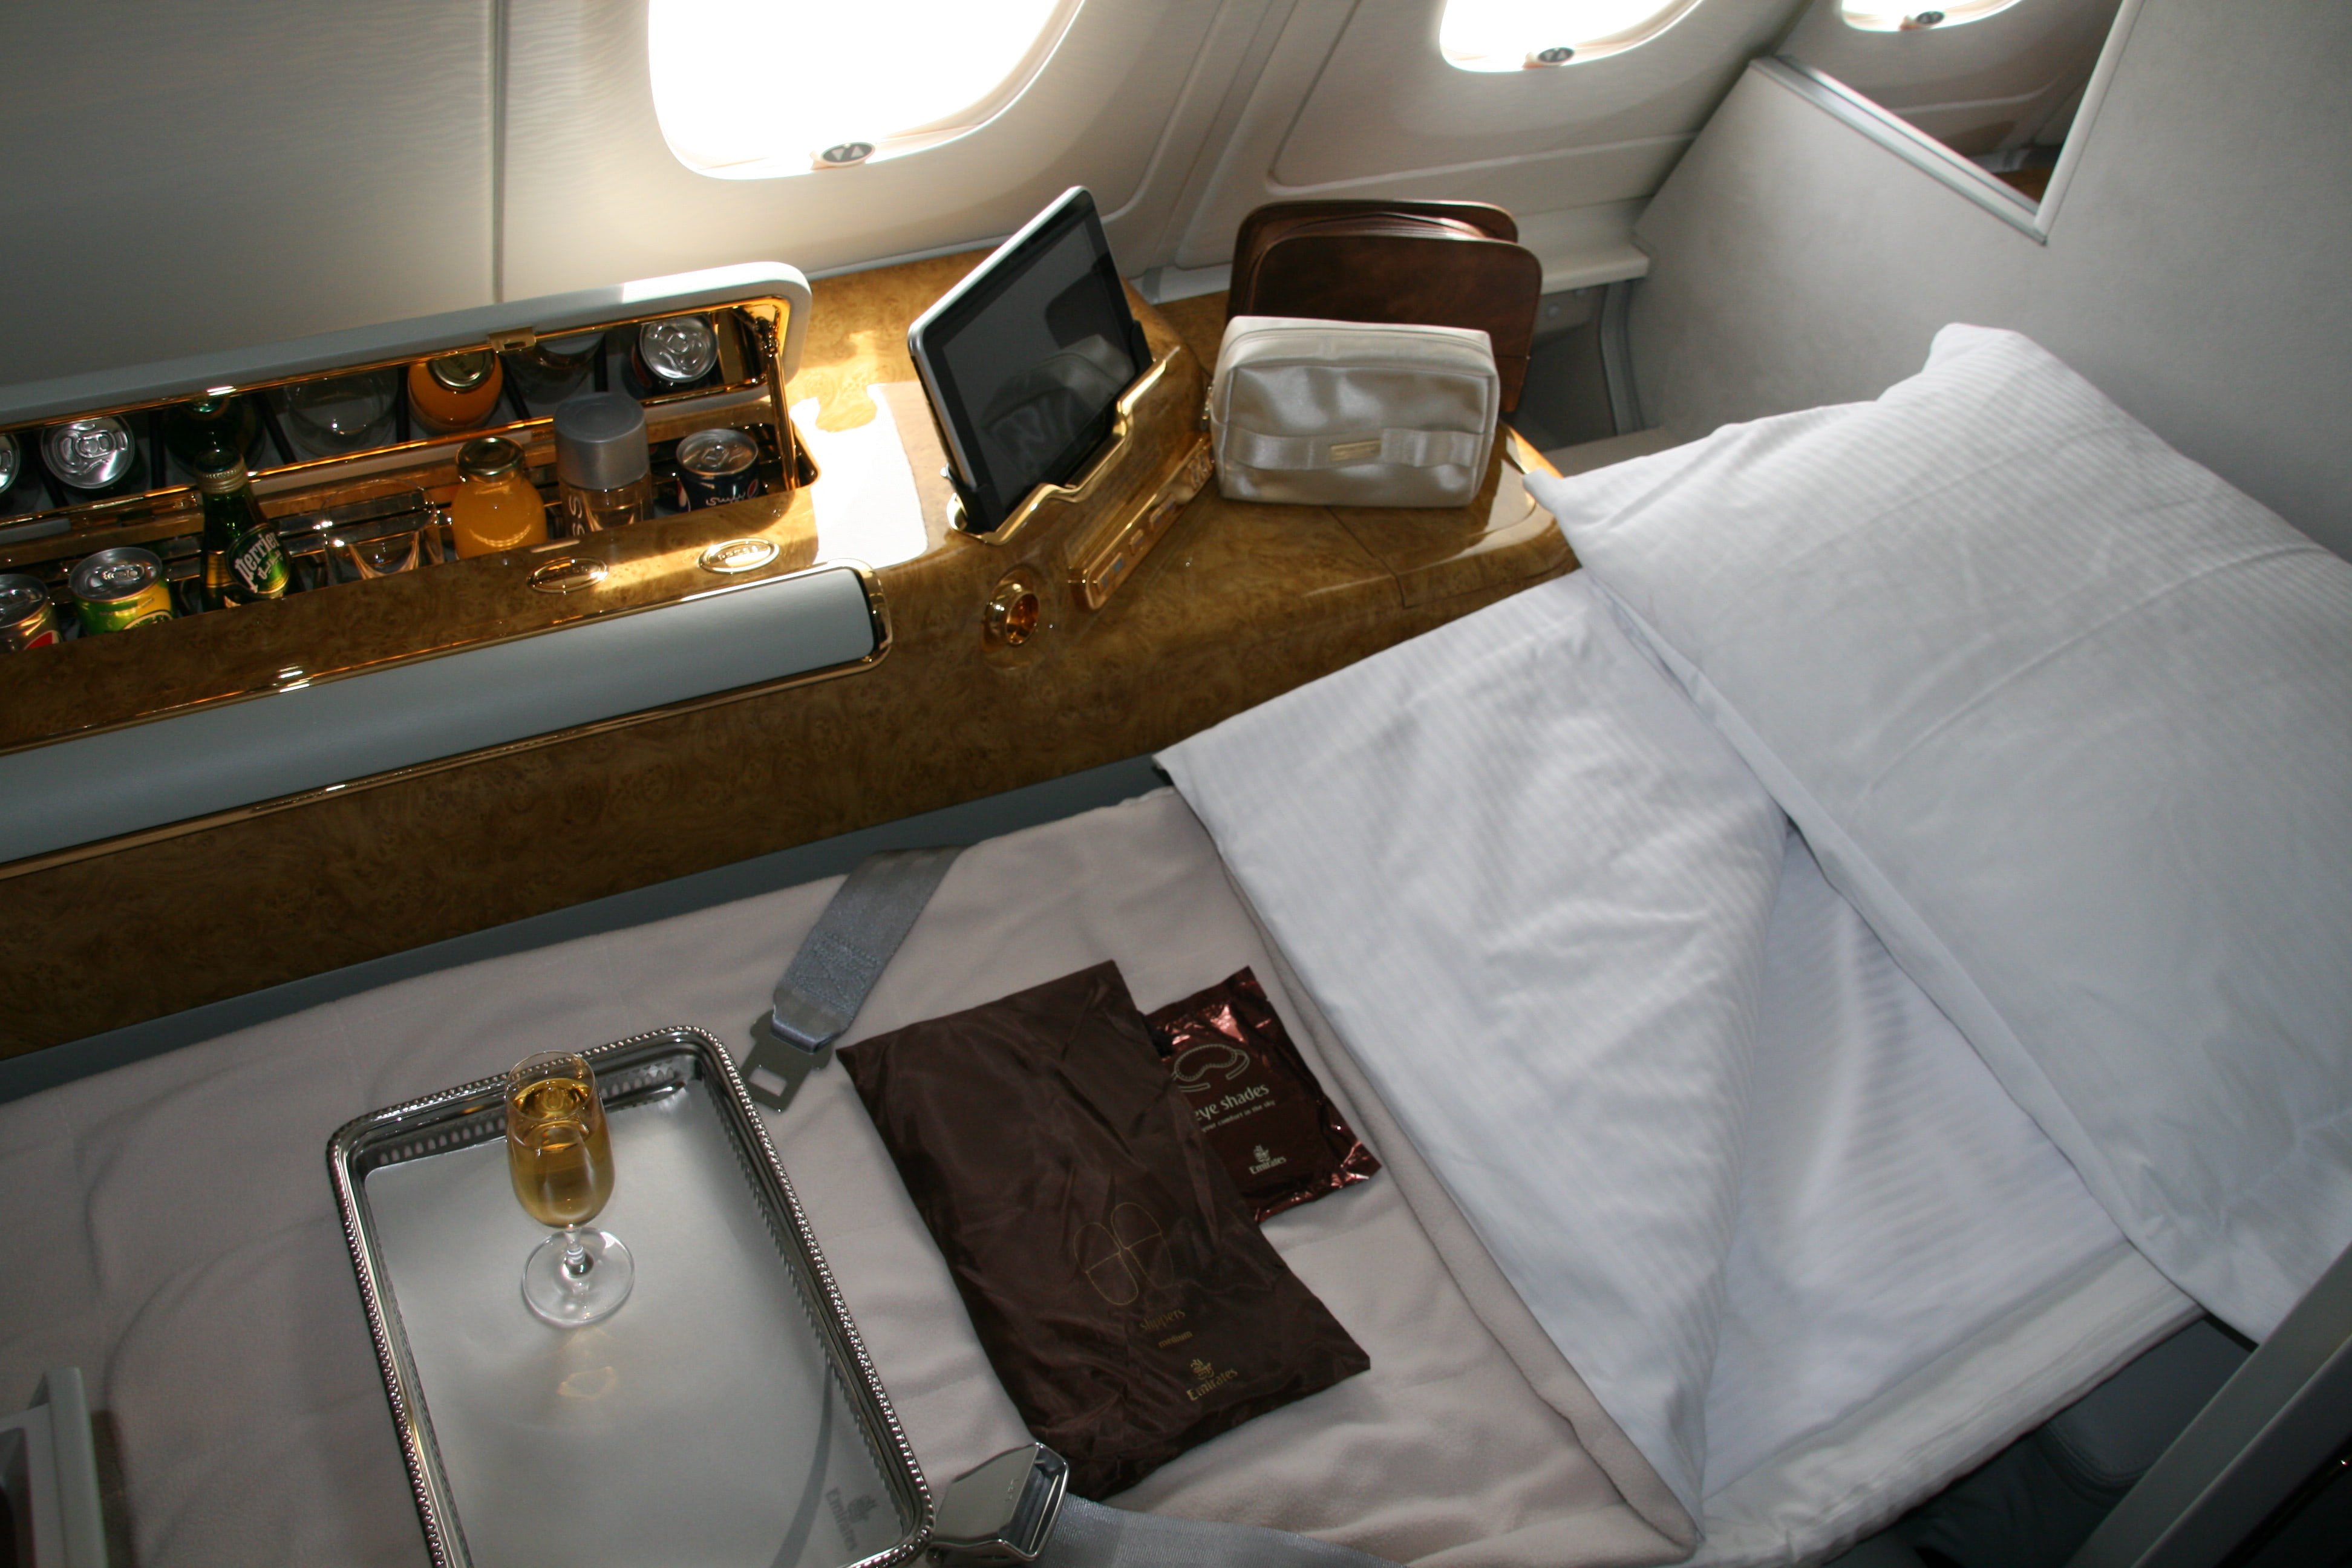 What are the Differences between Business and First Class?